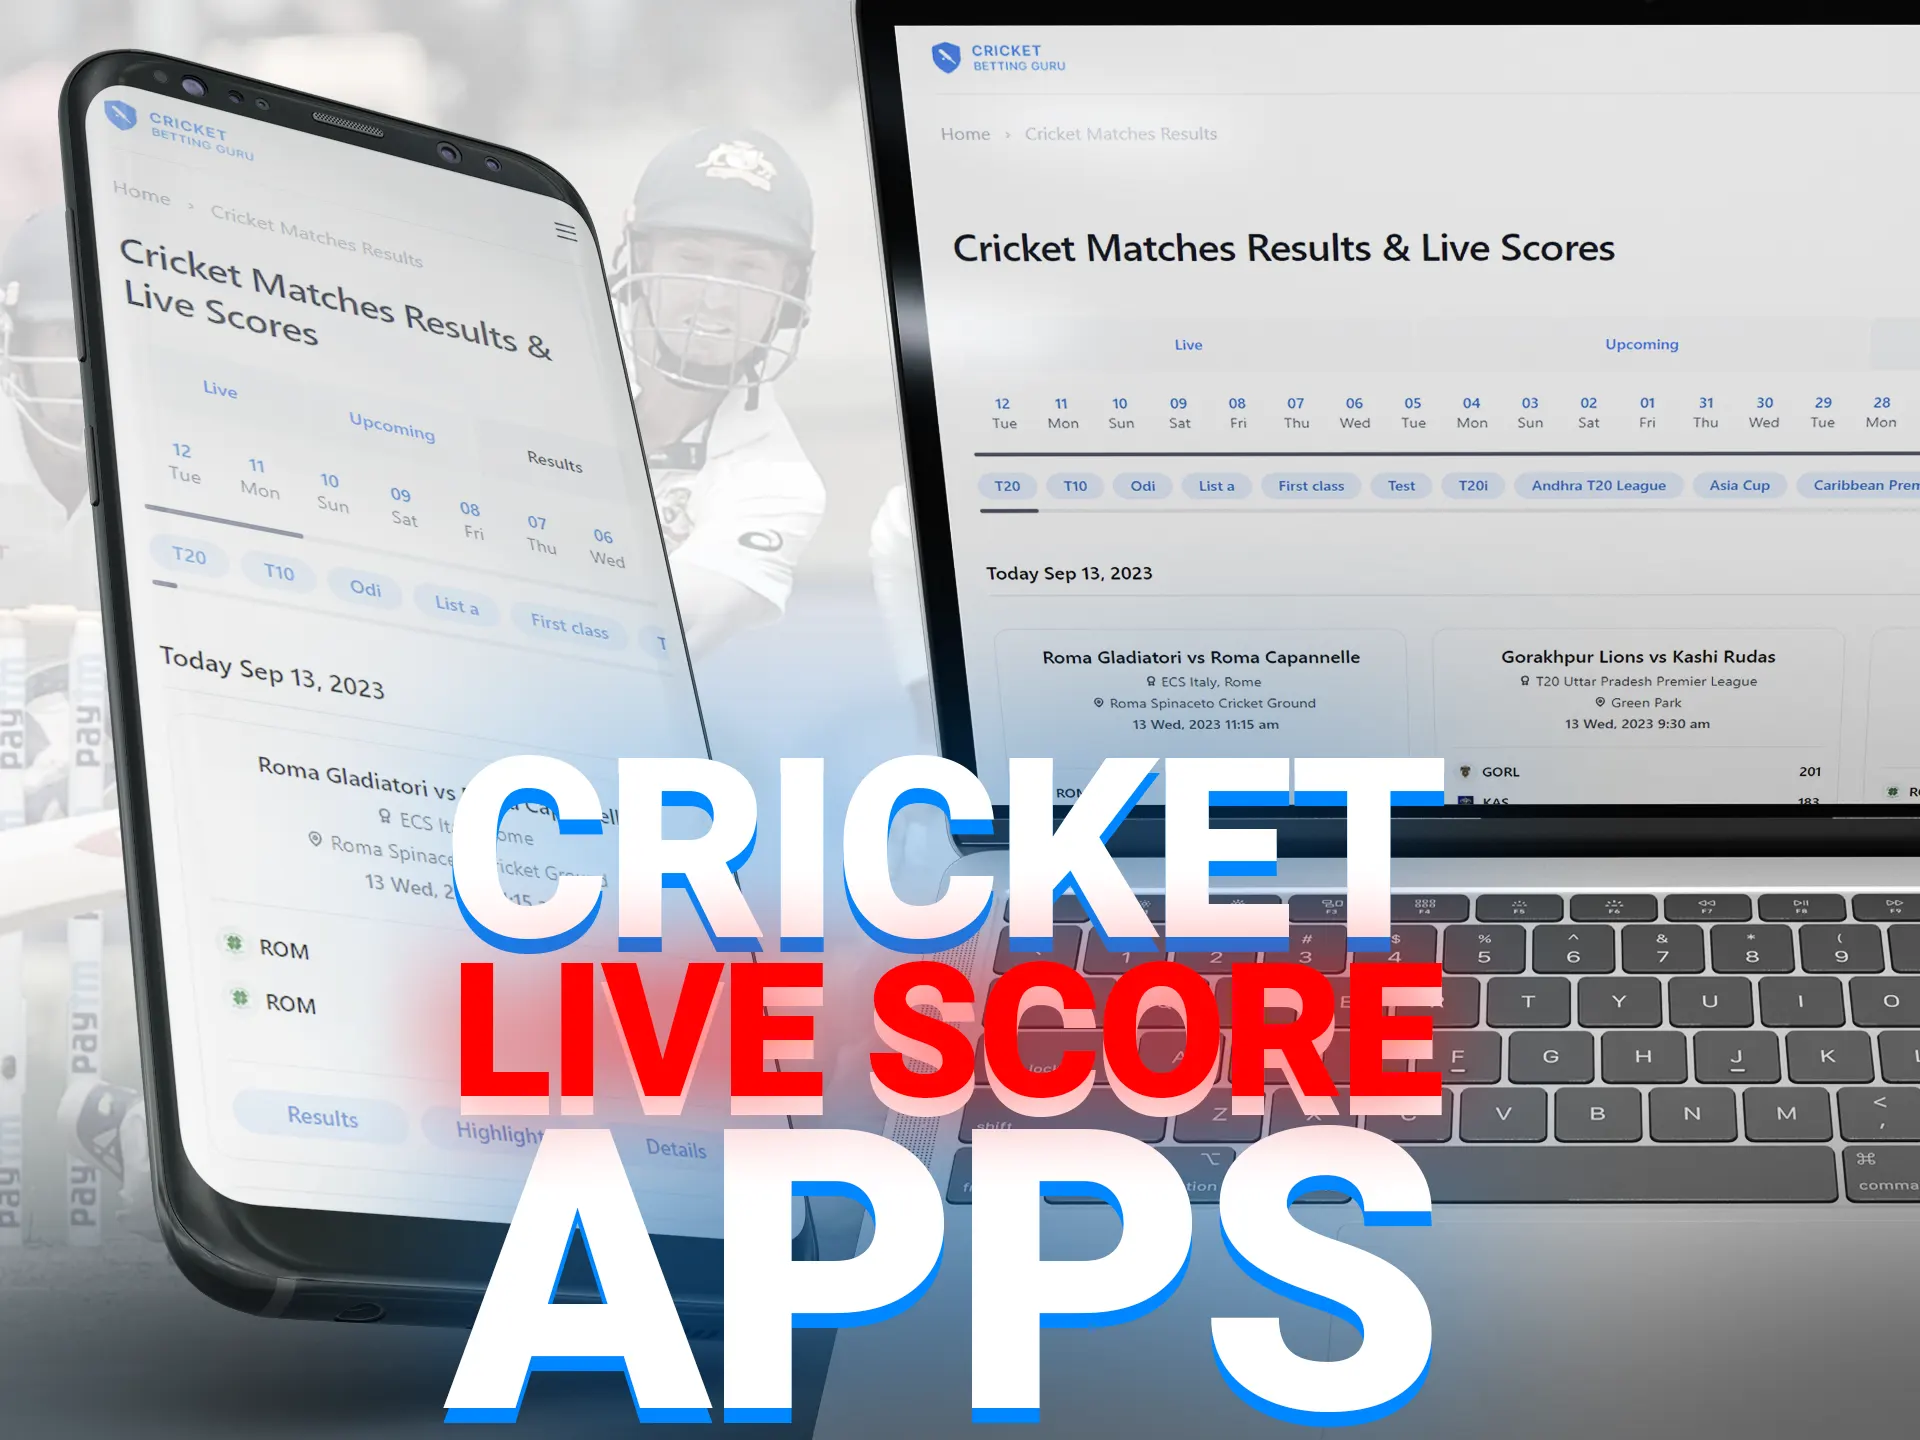 We invite you to visit our cricket live-streaming page.